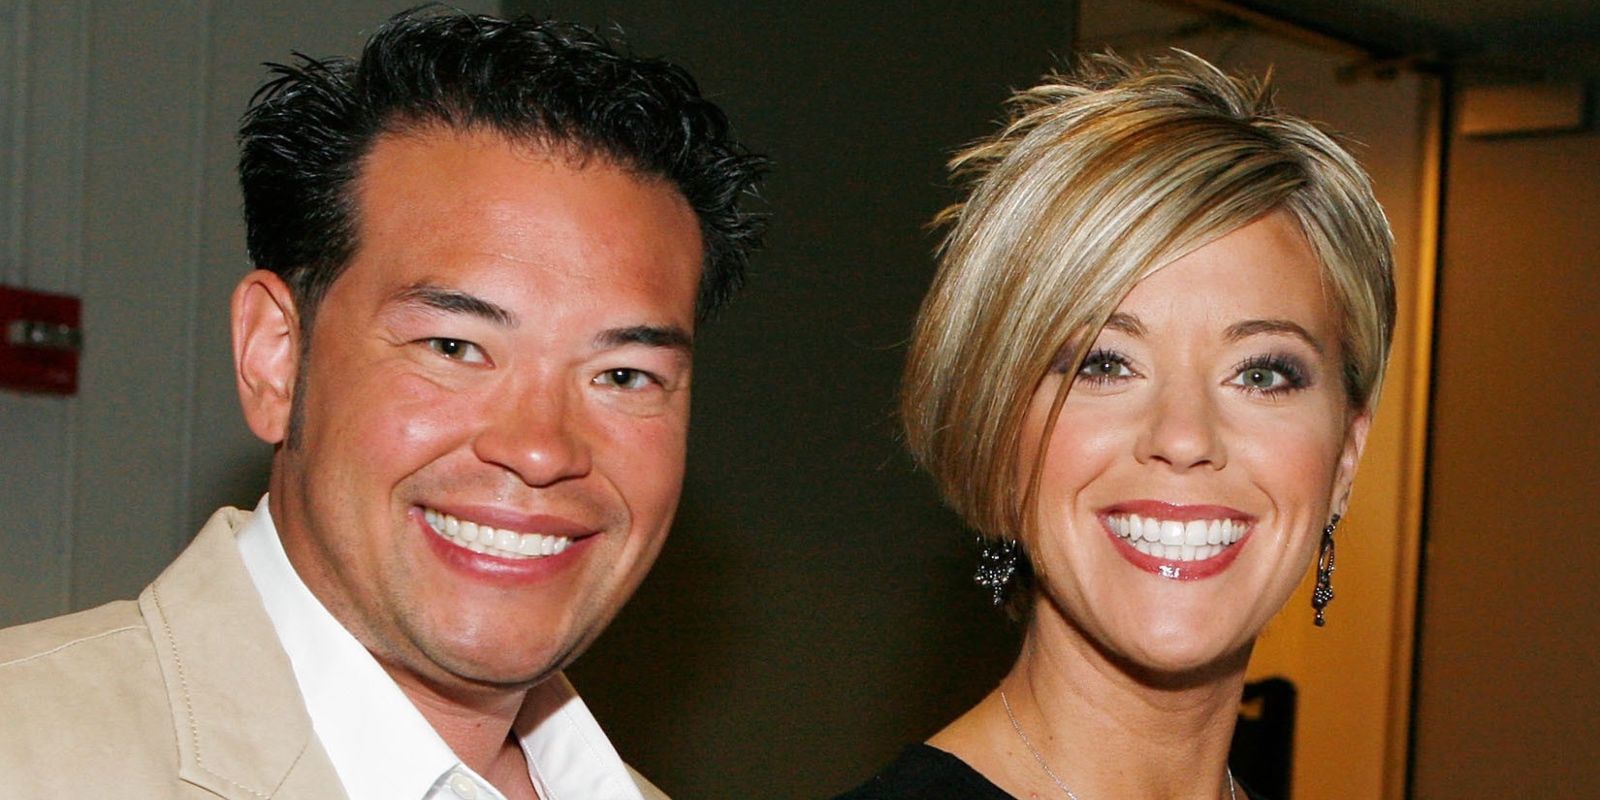 Jon Gosselin Says Marriage with Kate Never Stood a Chance Even Without Show